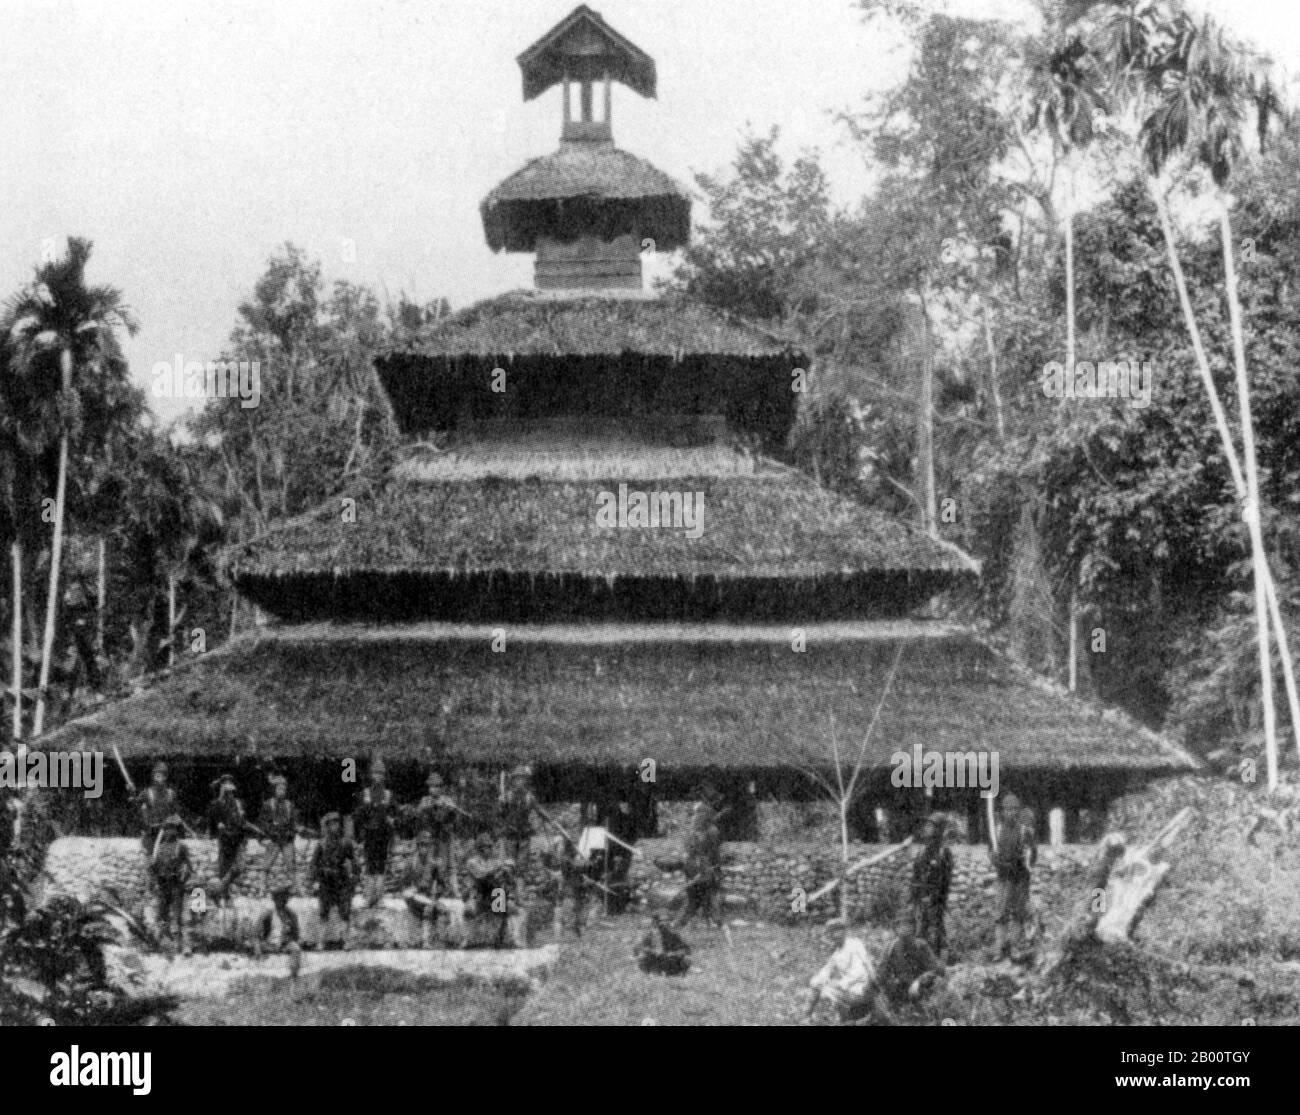 Indonesia: A late 19th-century photograph of a traditional Acehnese mosque in northern Sumatra.  Aceh is located on the northern tip of the island of Sumatra. It is thought to have been in Aceh where Islam was first established in Southeast Asia. In the early 17th century the Sultanate of Aceh was the most wealthy, powerful and cultivated state in the Malacca Straits region. Aceh province now has the highest proportion of Muslims in Indonesia and has regional levels of Sharia law. Stock Photo